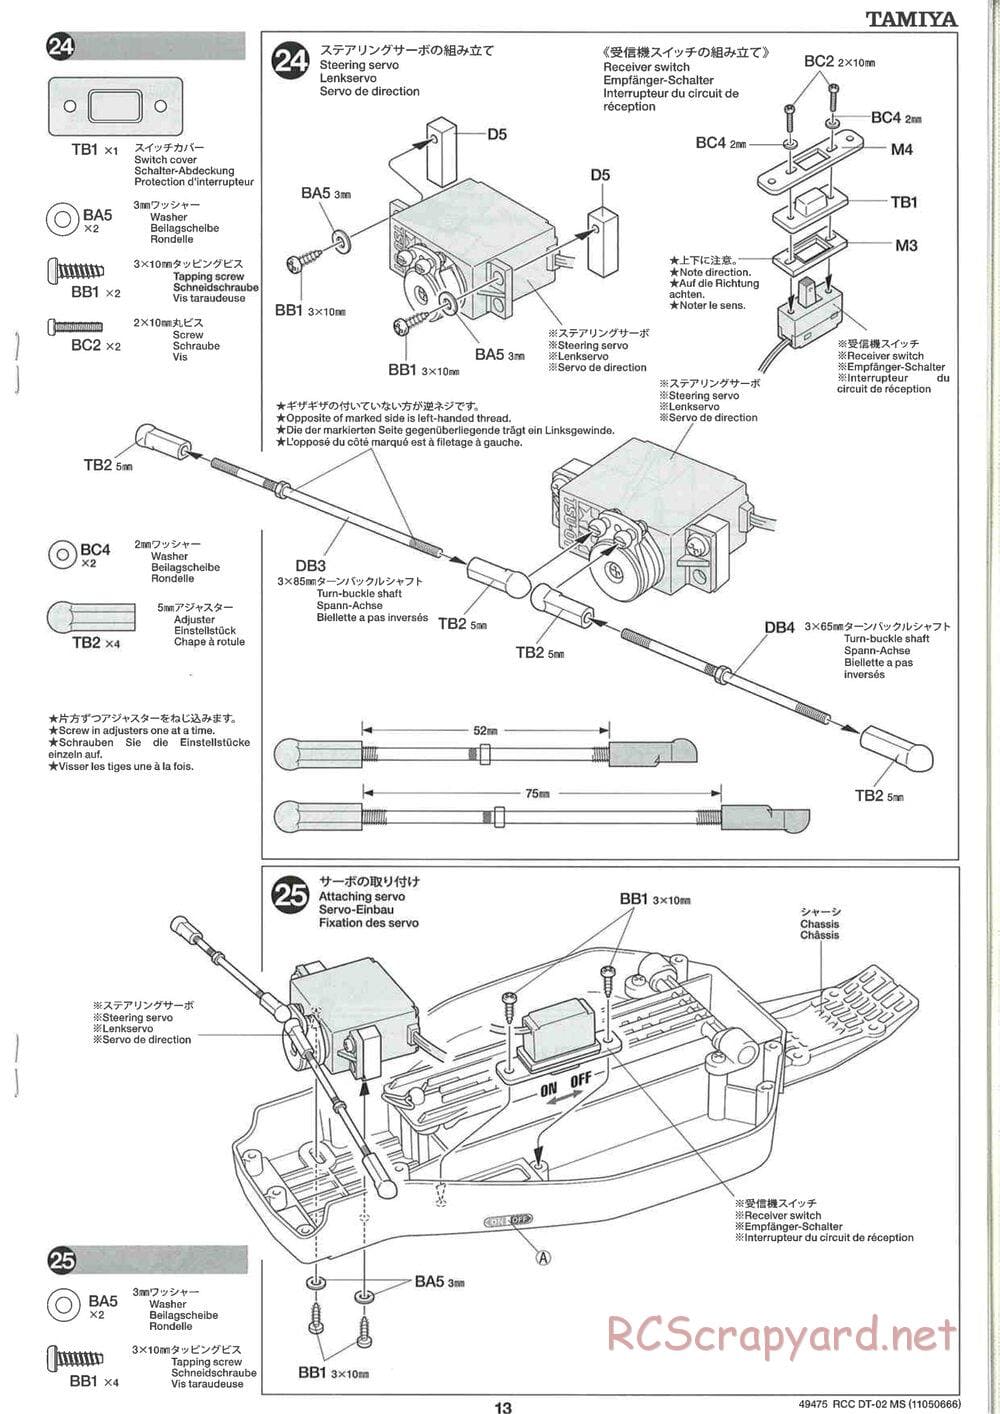 Tamiya - DT-02 MS Chassis - Manual - Page 14